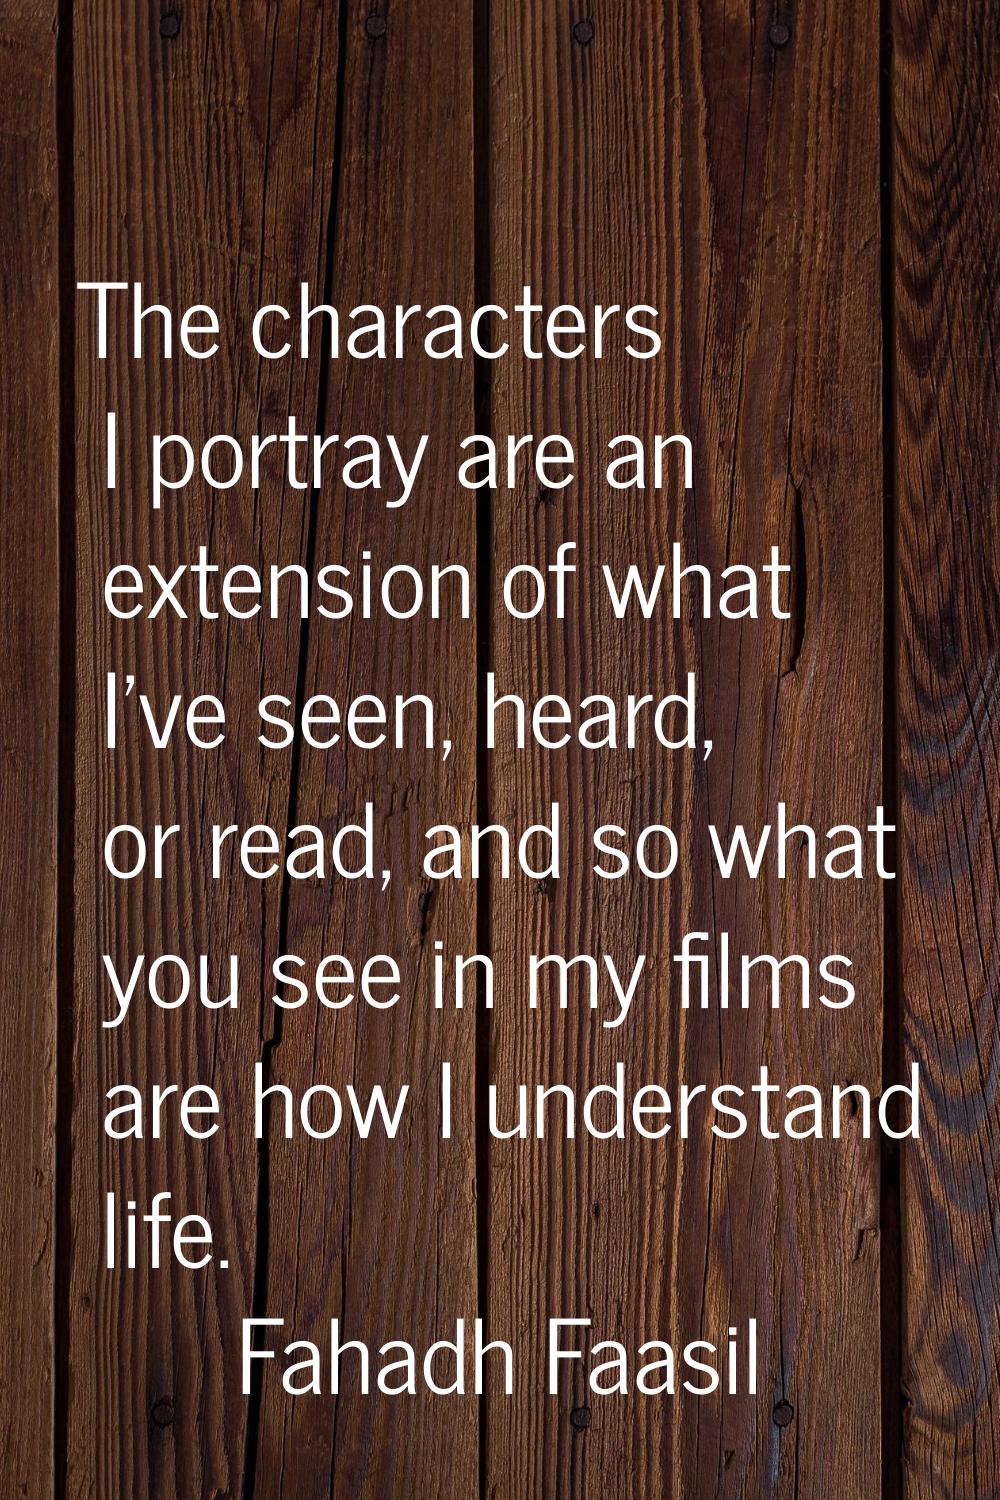 The characters I portray are an extension of what I've seen, heard, or read, and so what you see in